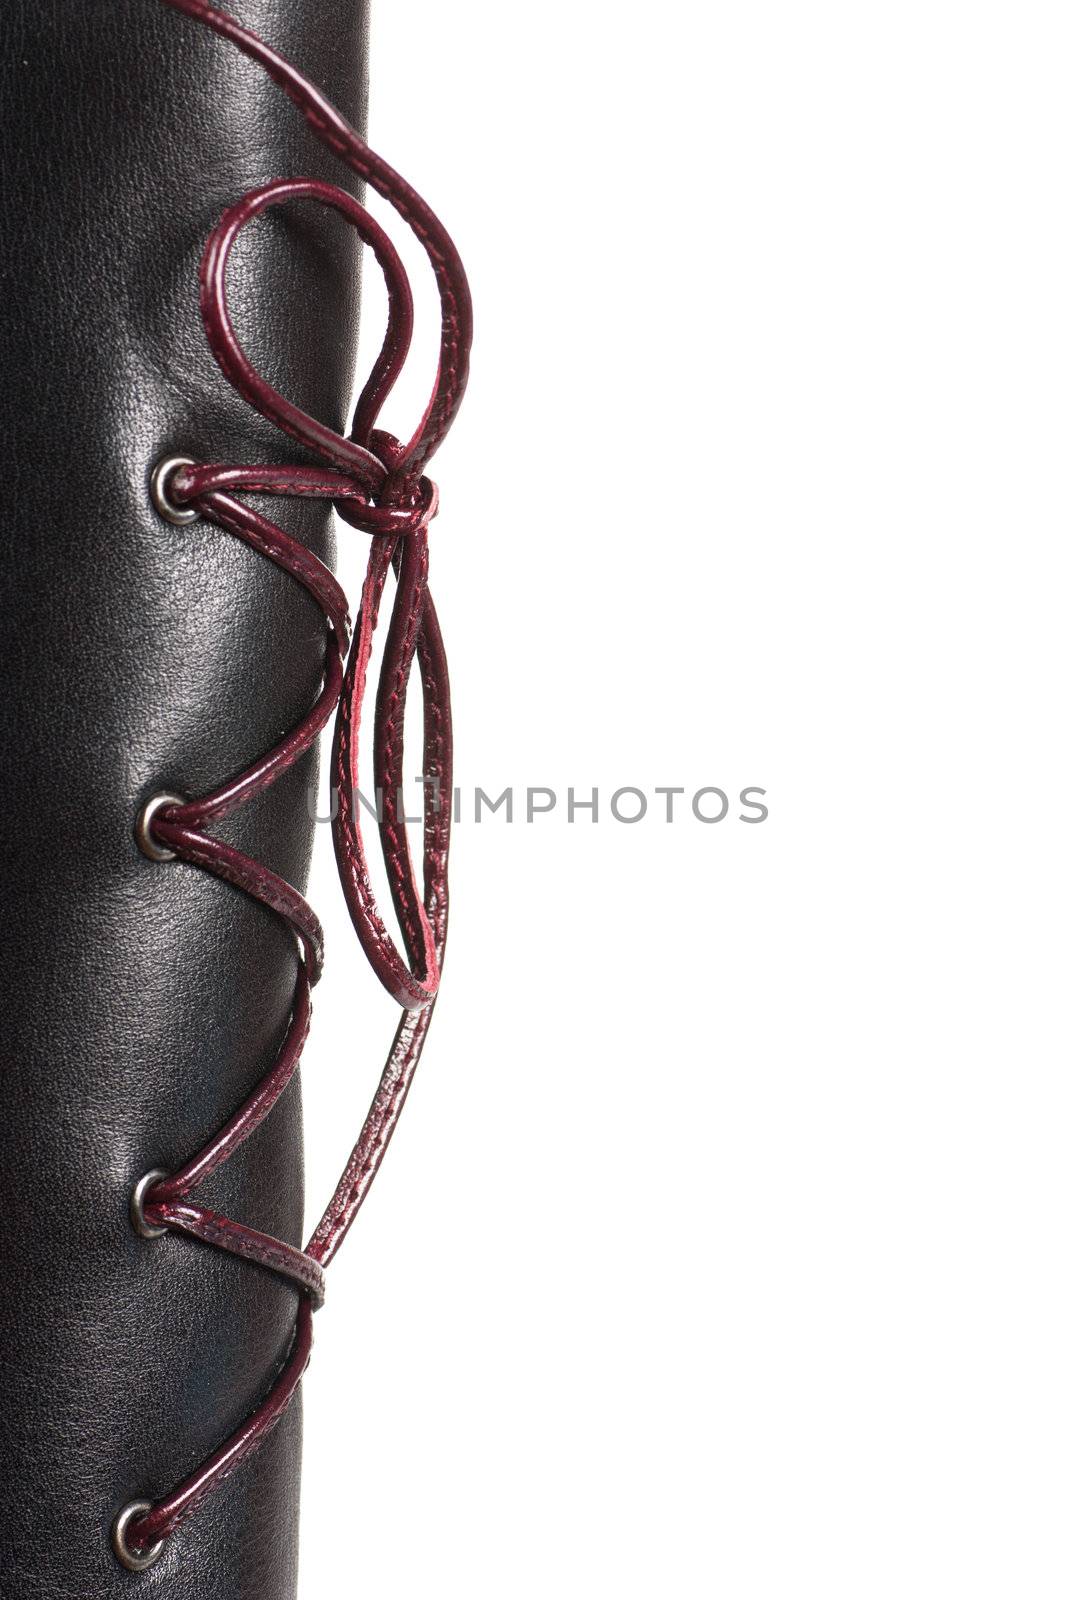 Lace on high leather boot isolated over white